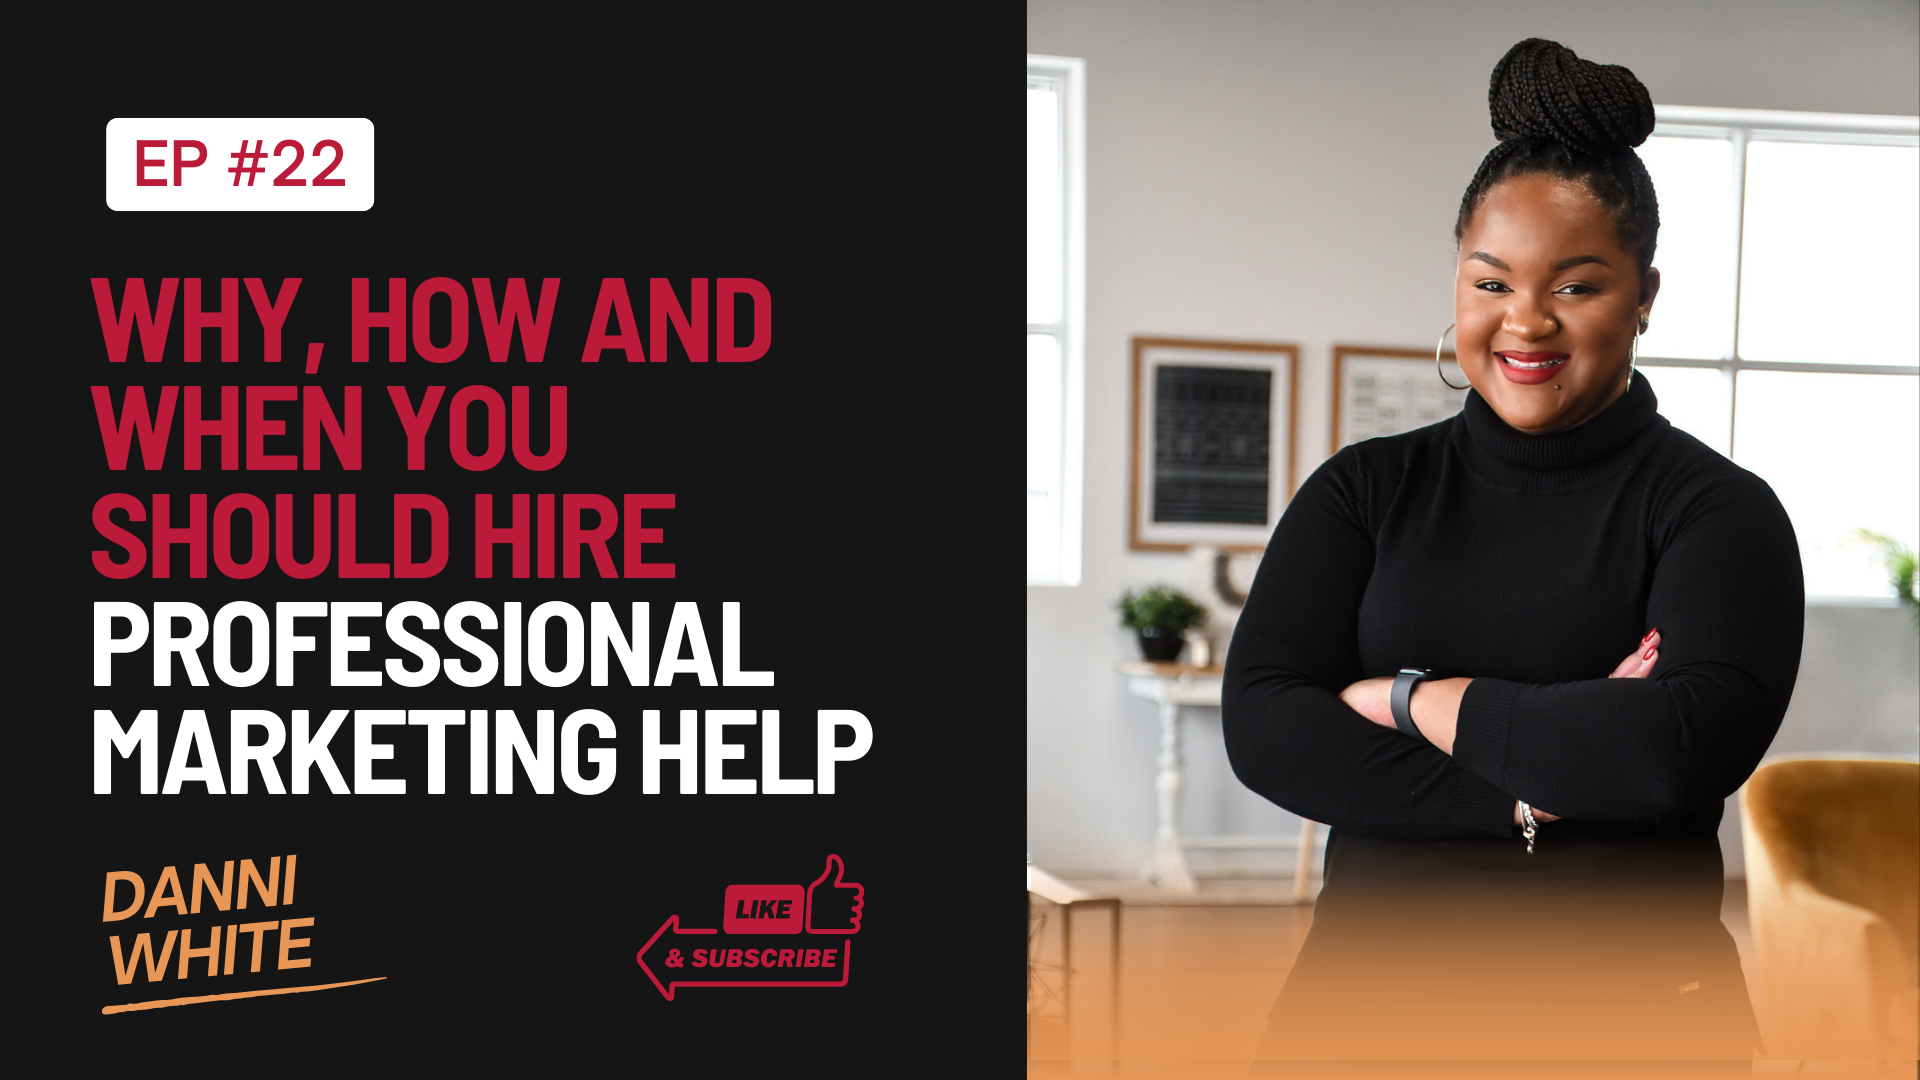 Episode 22: Why, How and When You Should Hire Professional Marketing Help